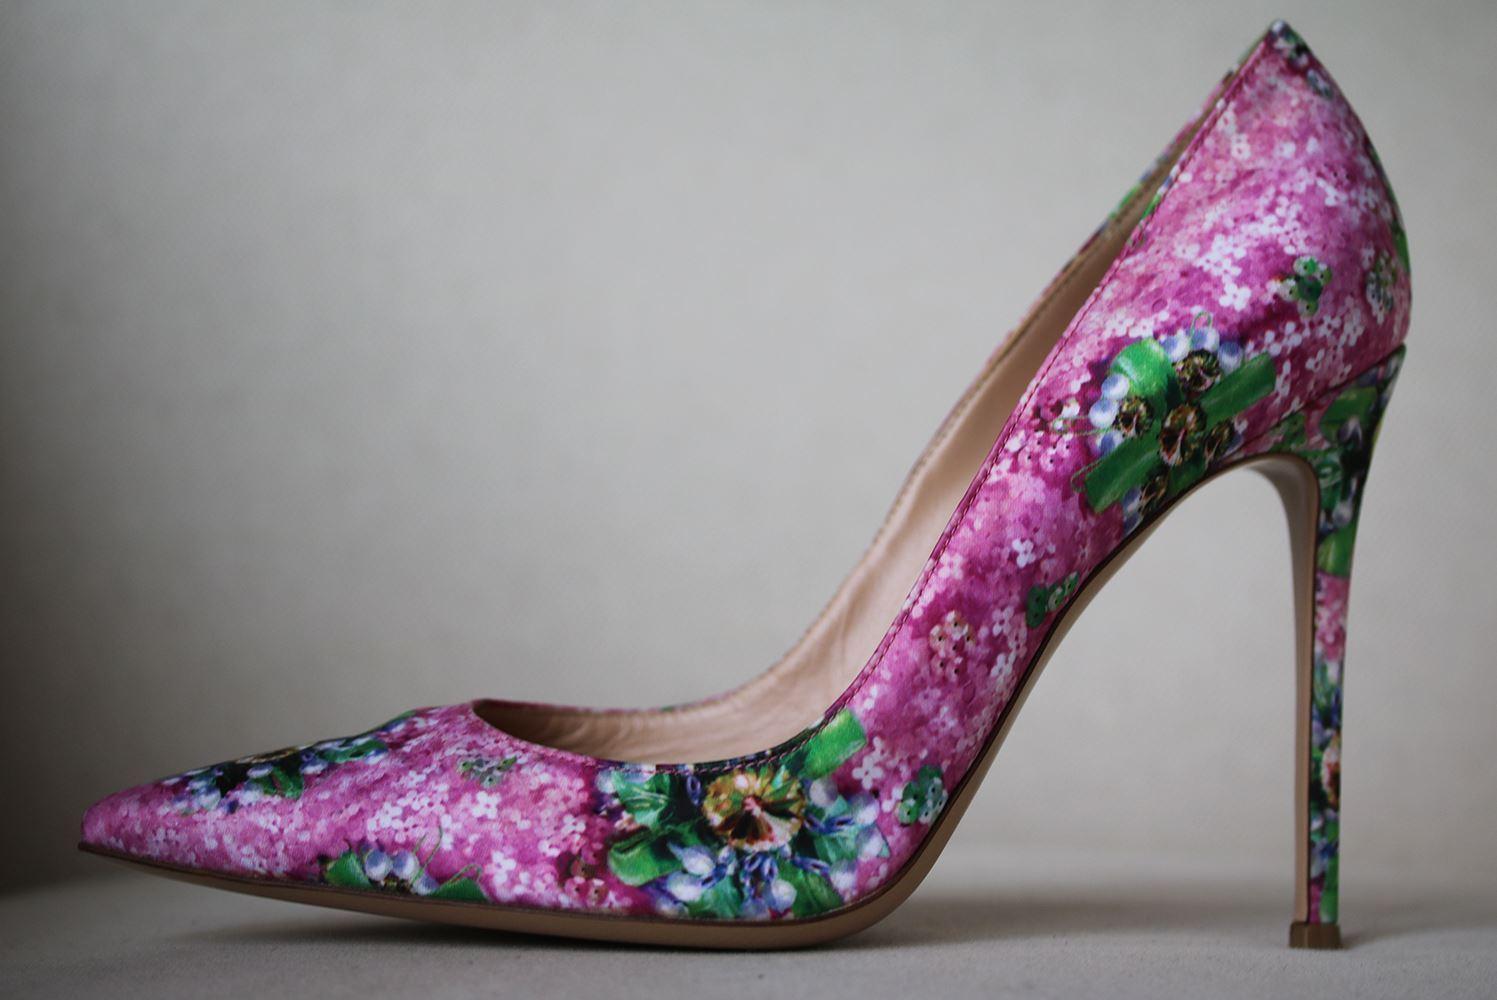 Mary Katrantzou + Gianvito Rossi collaboration. Heel measures approximately 100mm/ 4 inches. Shoes fascinated Mary Katrantzou this spring, so she partnered with Gianvito Rossi to create her own. These satin pumps feature the runway's kaleidoscopic